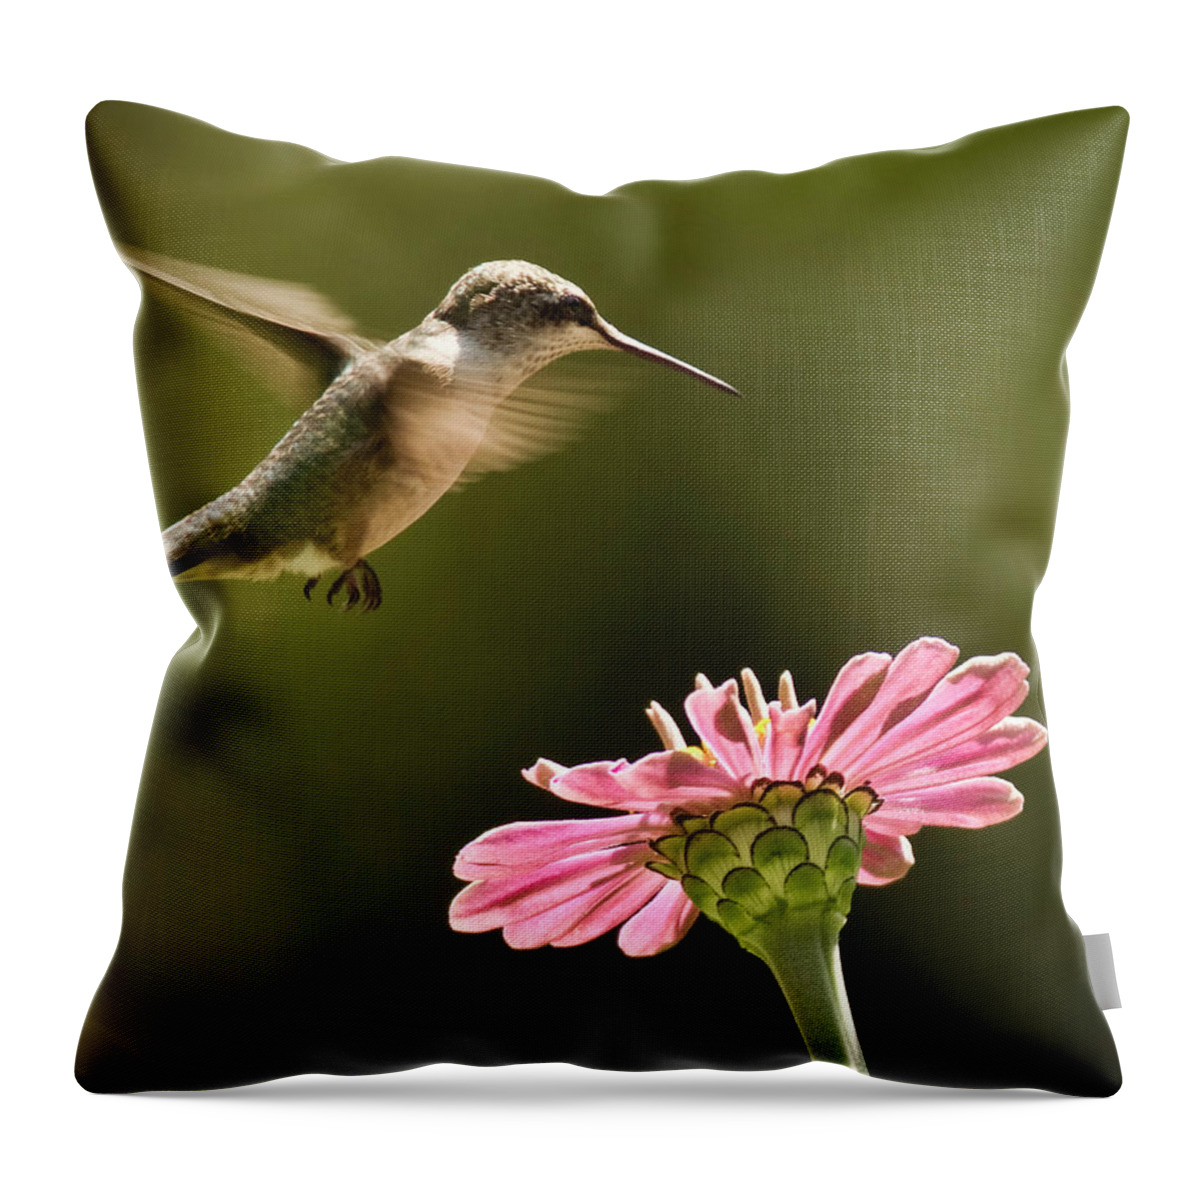 One Animal Throw Pillow featuring the photograph Hummingbird by Jody Trappe Photography